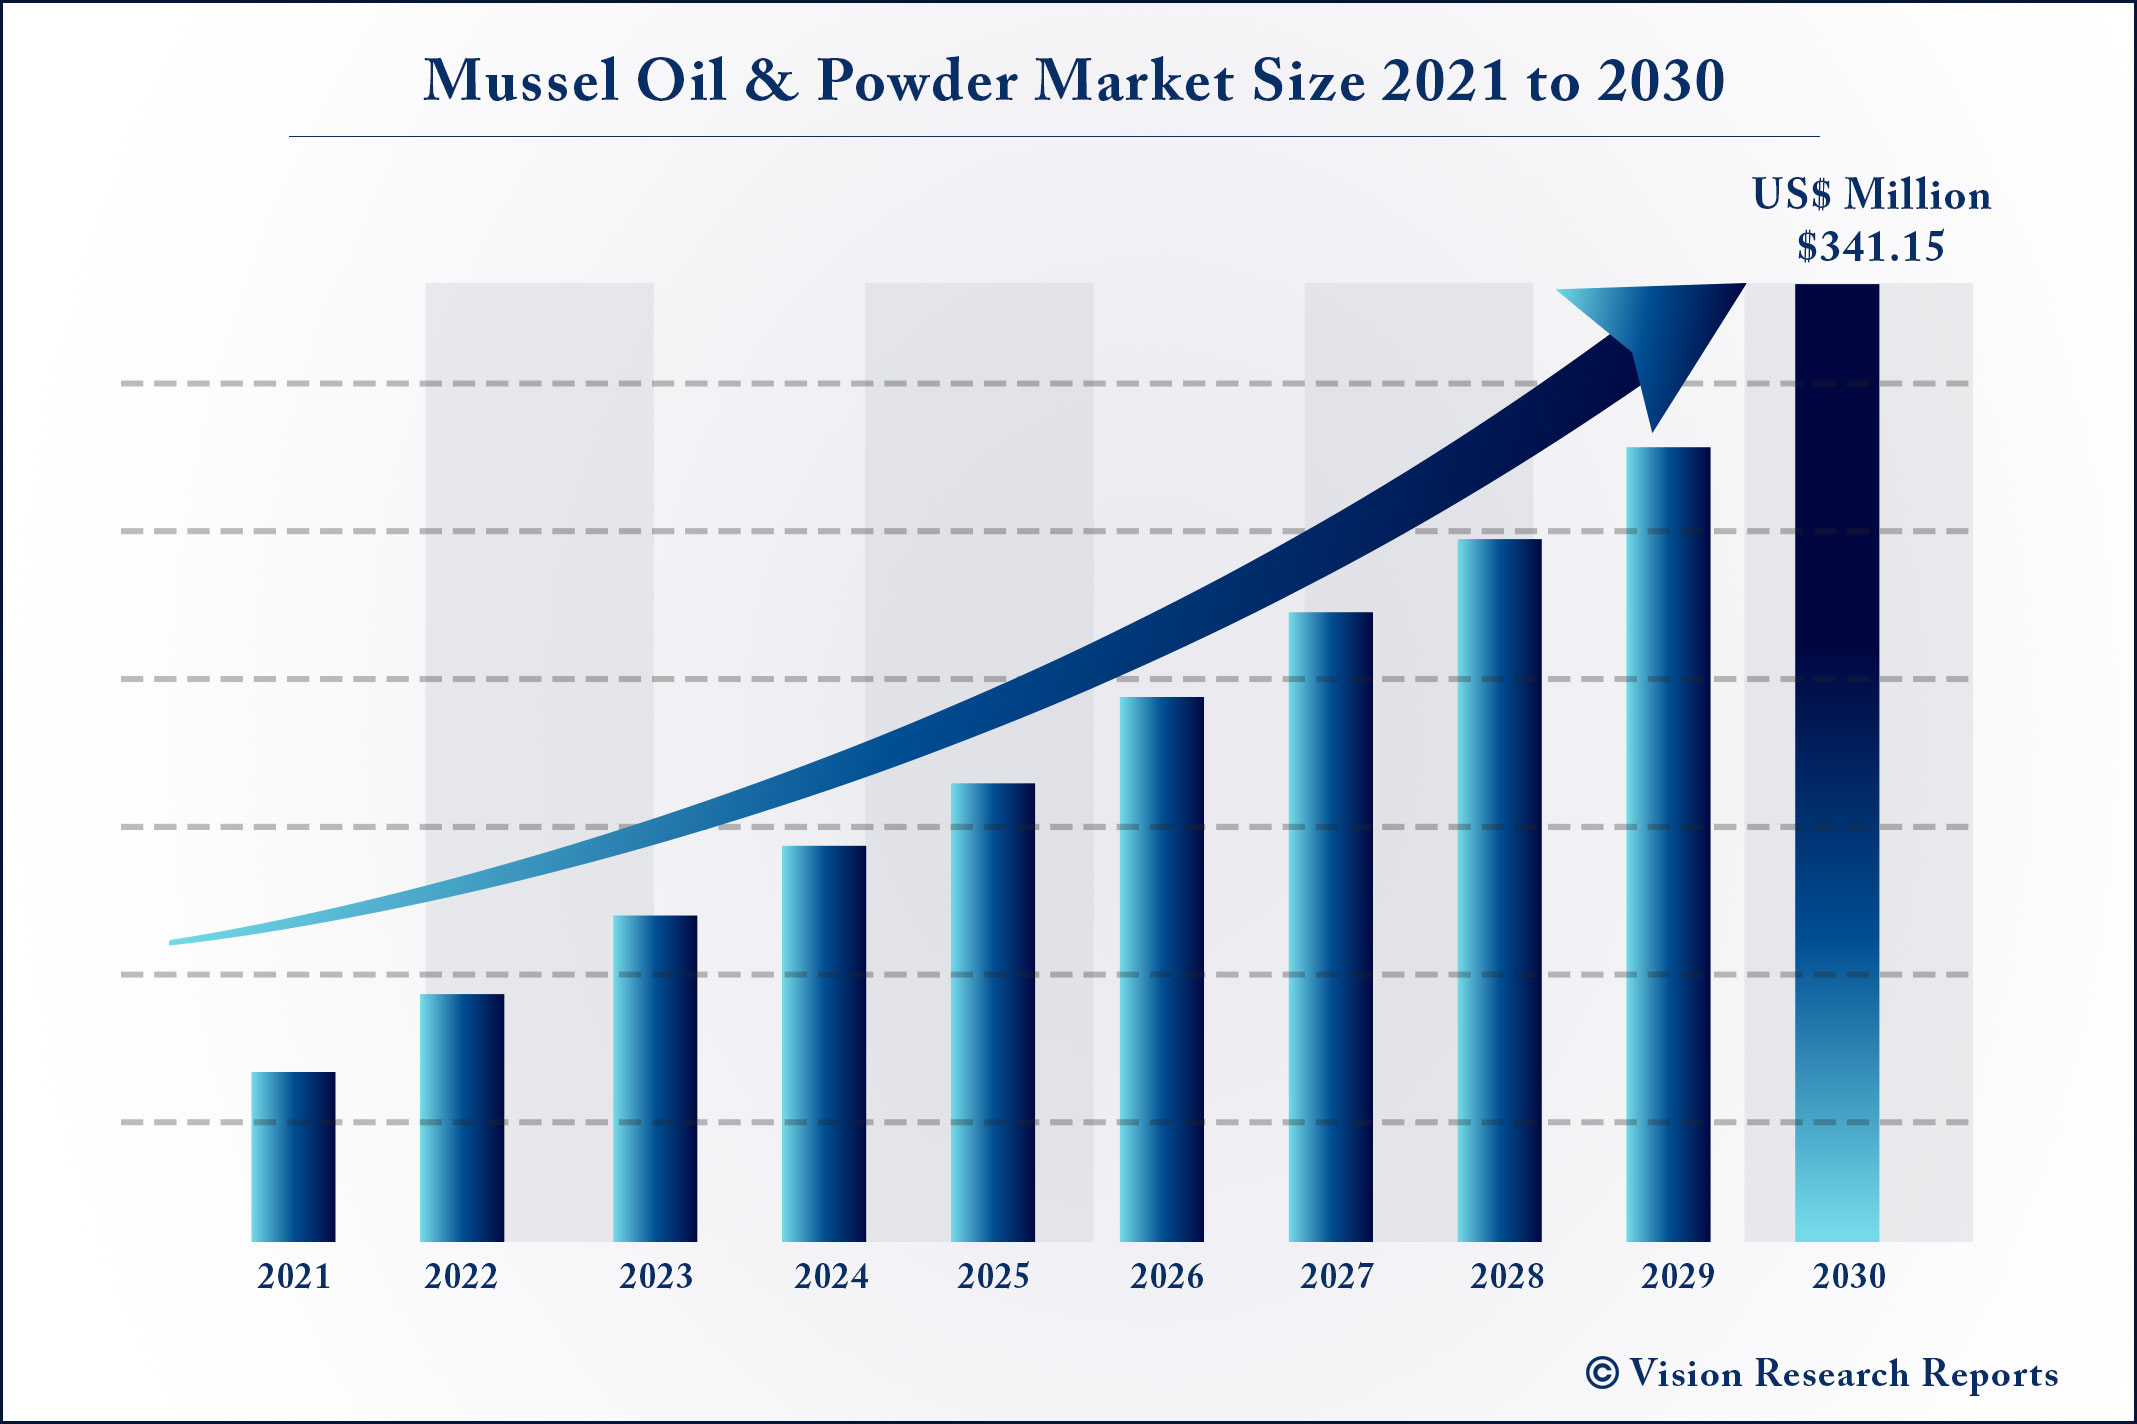 Mussel Oil & Powder Market Size 2021 to 2030